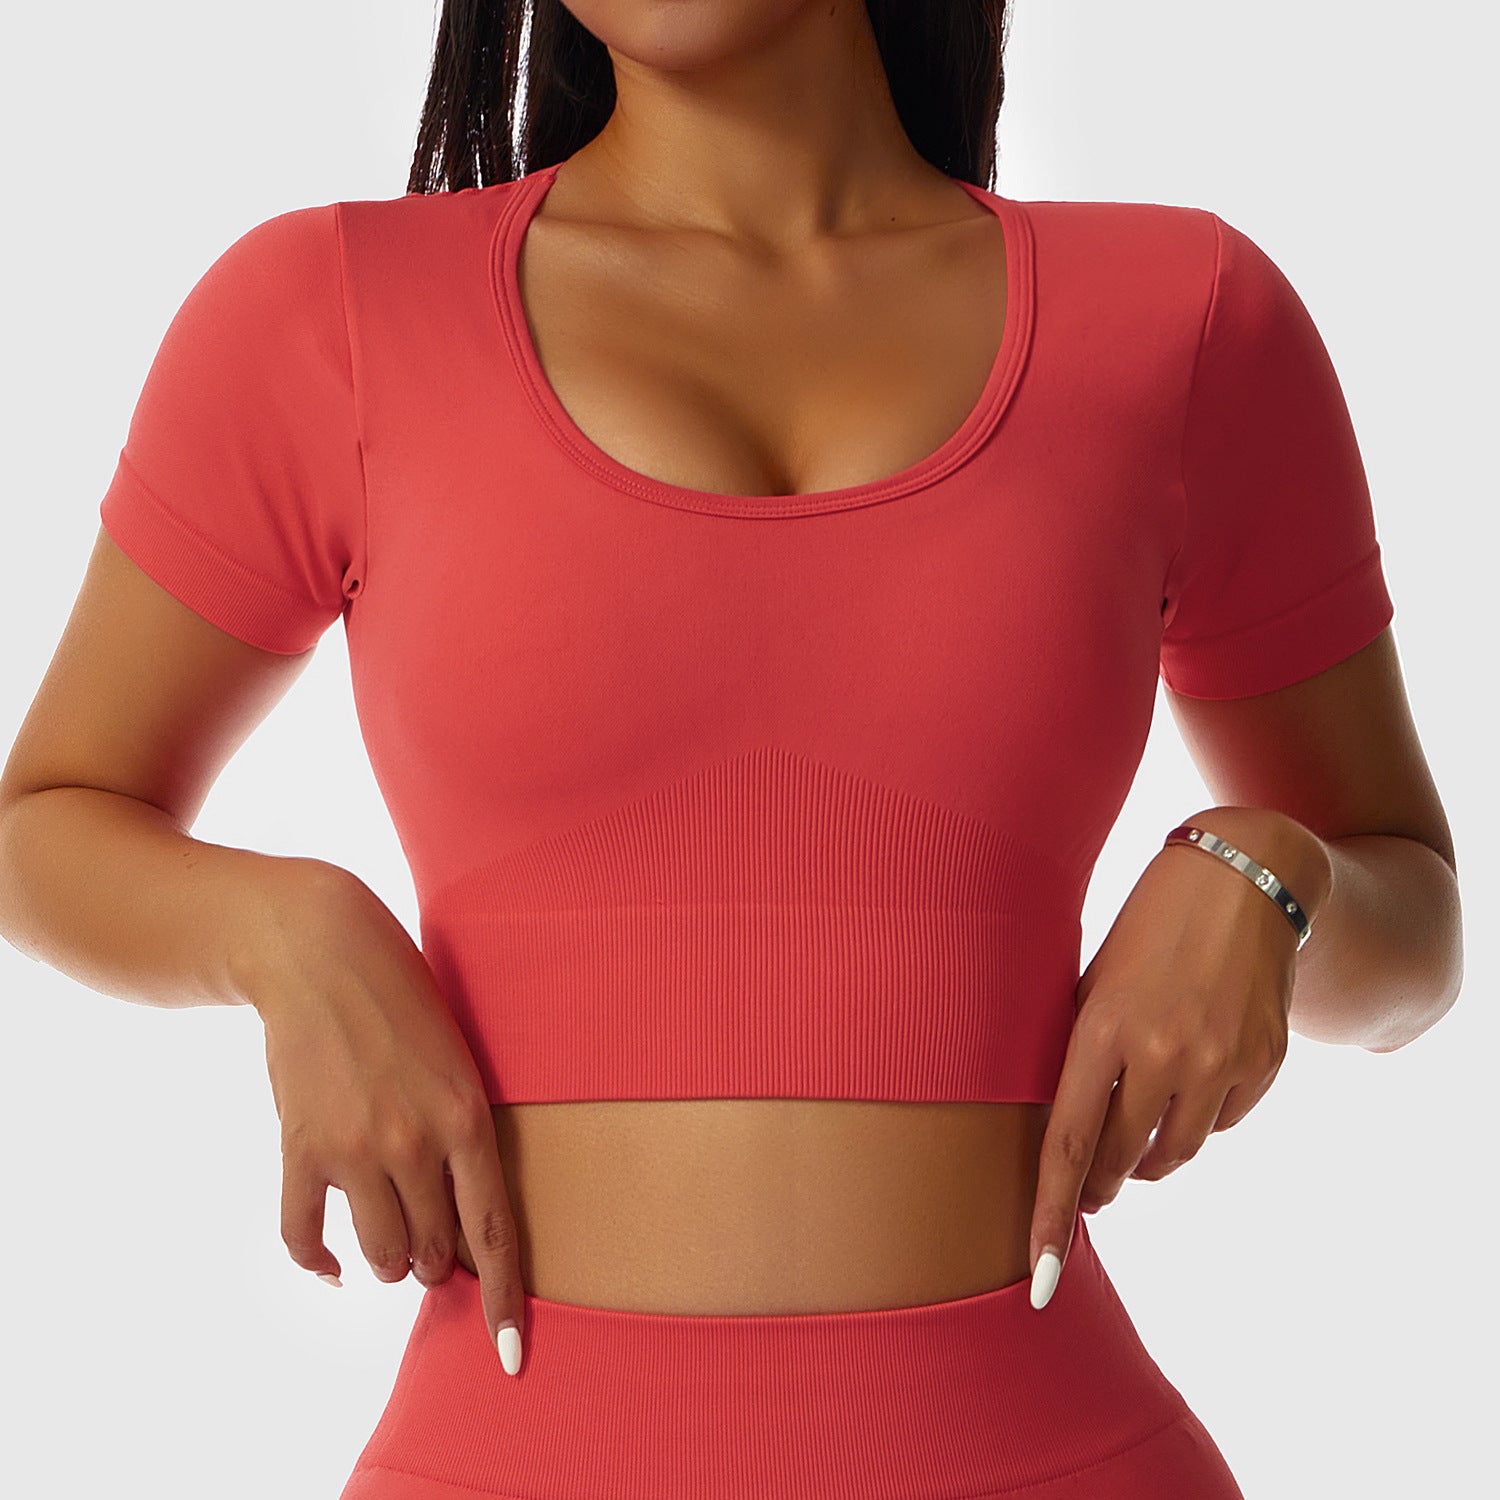 High strength comfy sports top